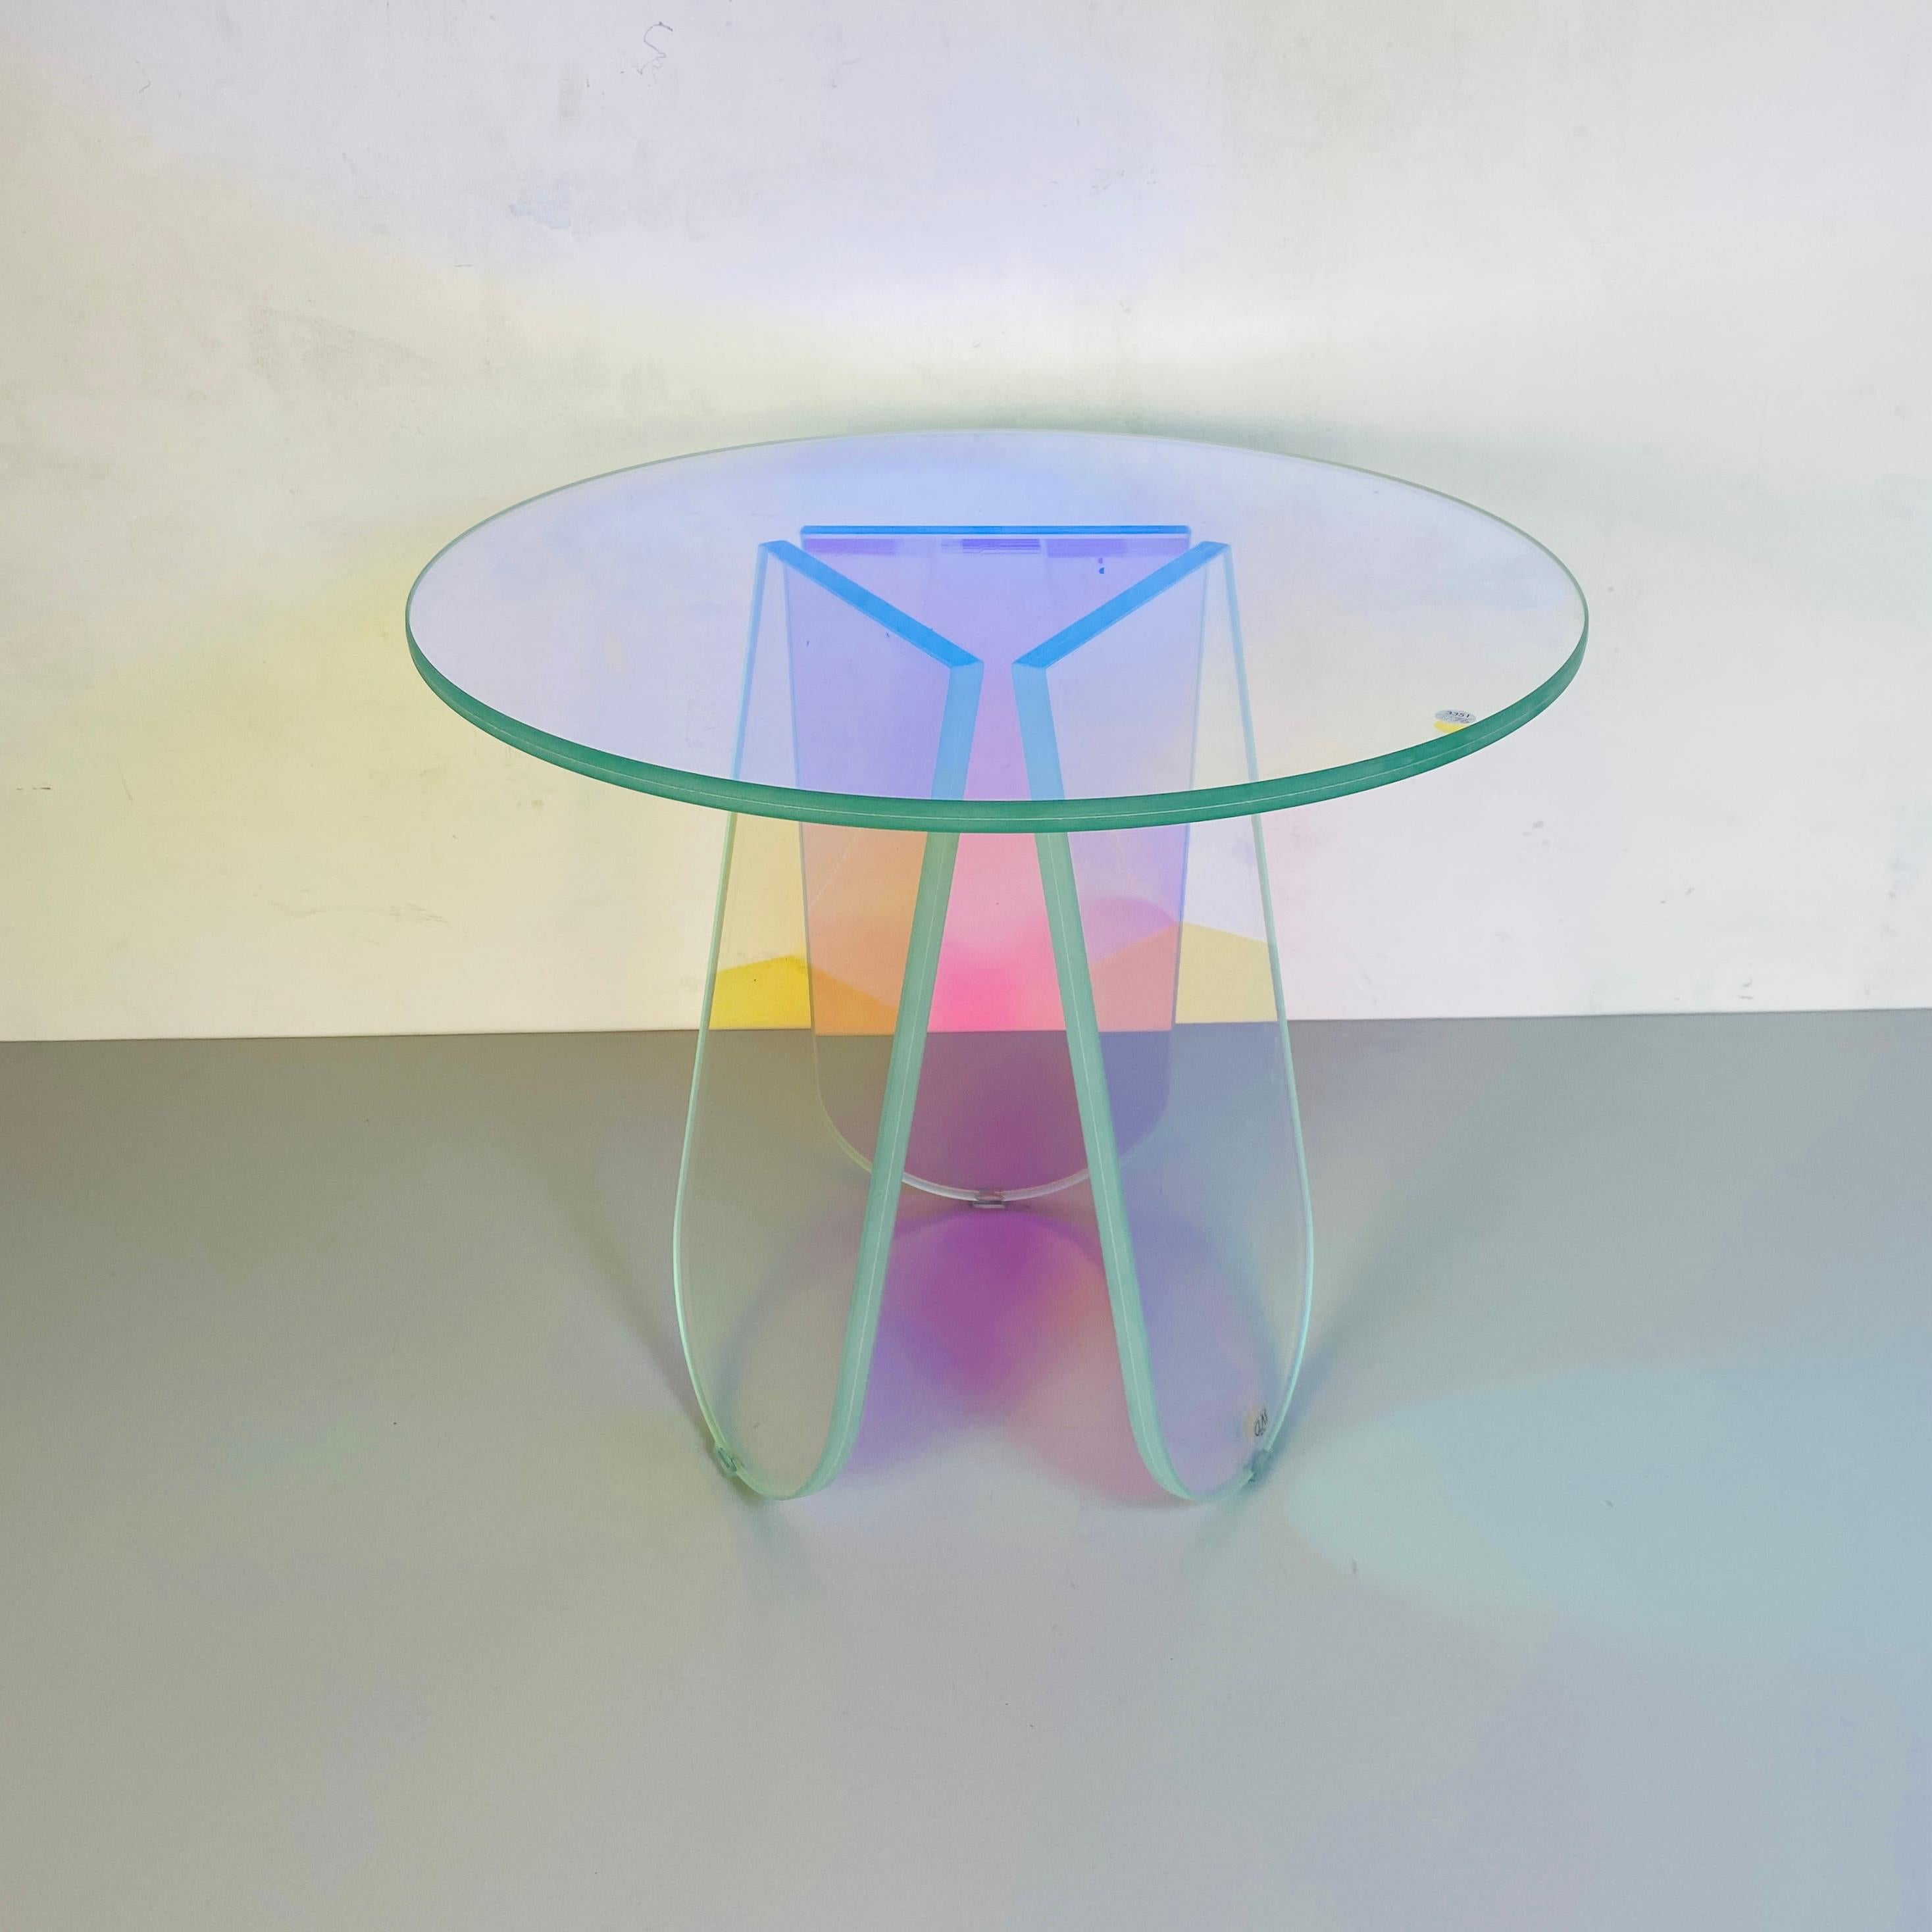 Contemporary Round Iridescent Glass Coffee Table by Patricia Urquiola for Glas Italia, 2015